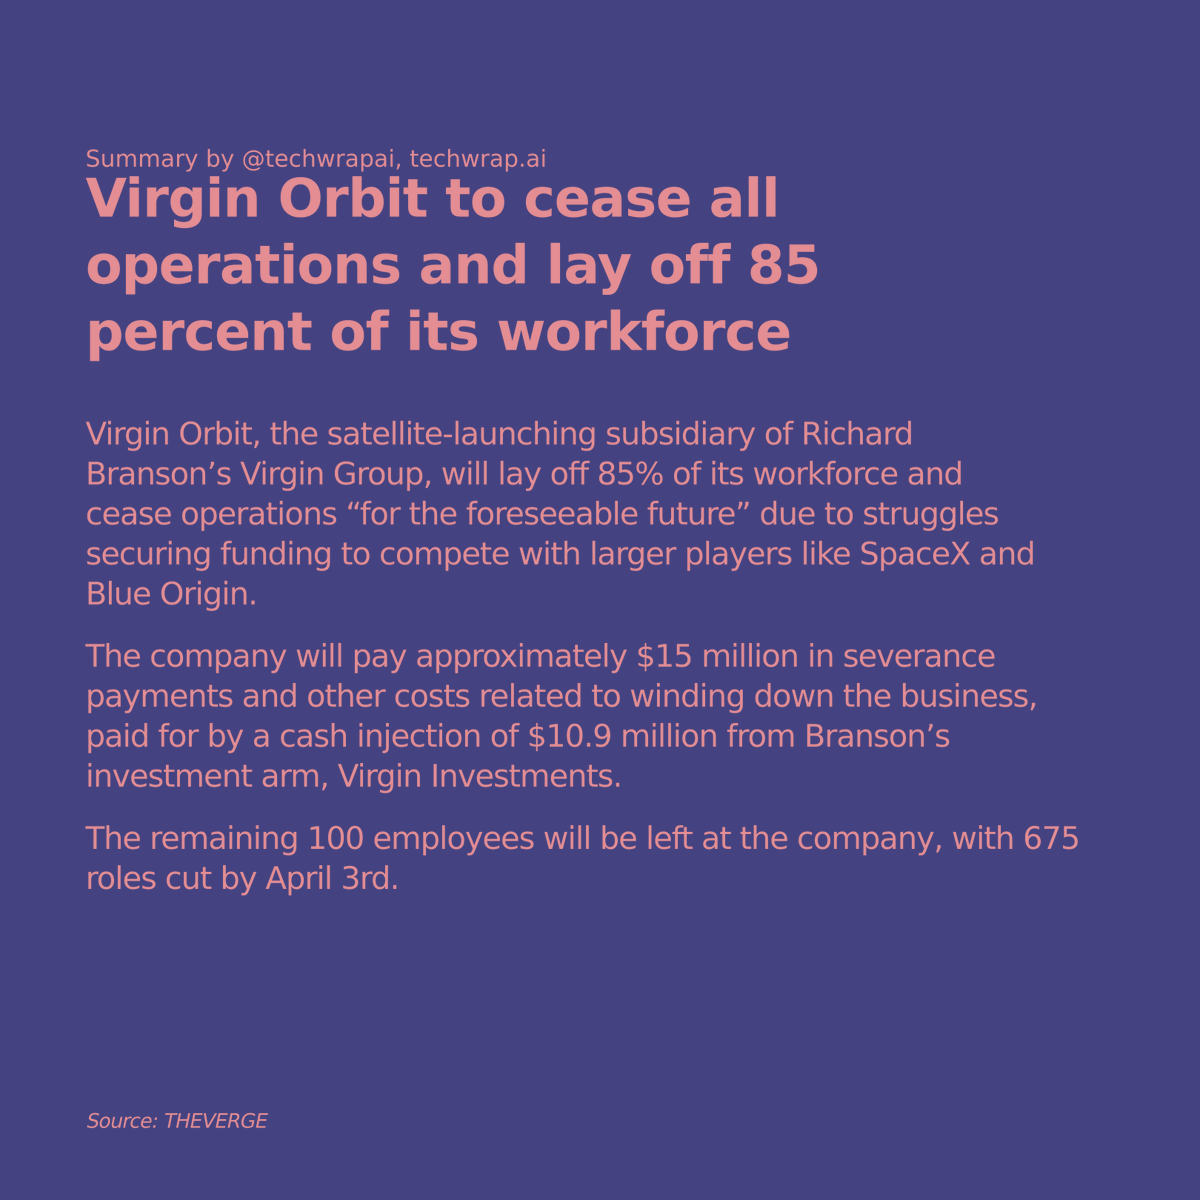 Virgin Orbit to cease all operations and lay off 85 percent of its workforce (2 minute read)

#VirginOrbit #SpaceIndustry #Layoffs #FundingStruggles

Read more: theverge.com/2023/3/31/2366…